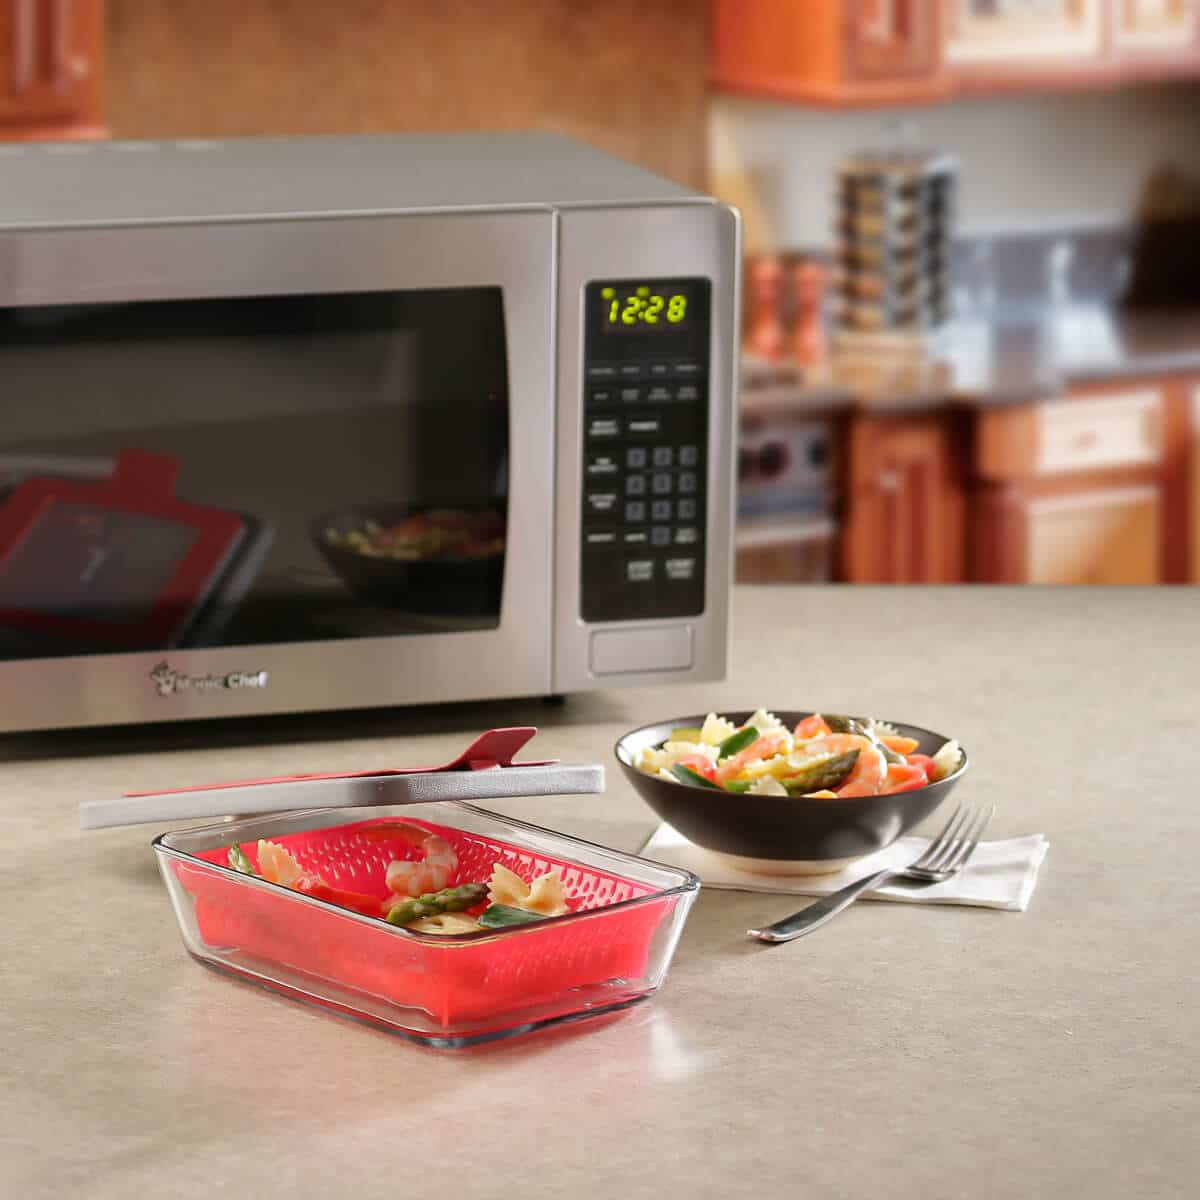 Magic Chef Mc99mst Countertop Microwave Oven, Small Microwave For